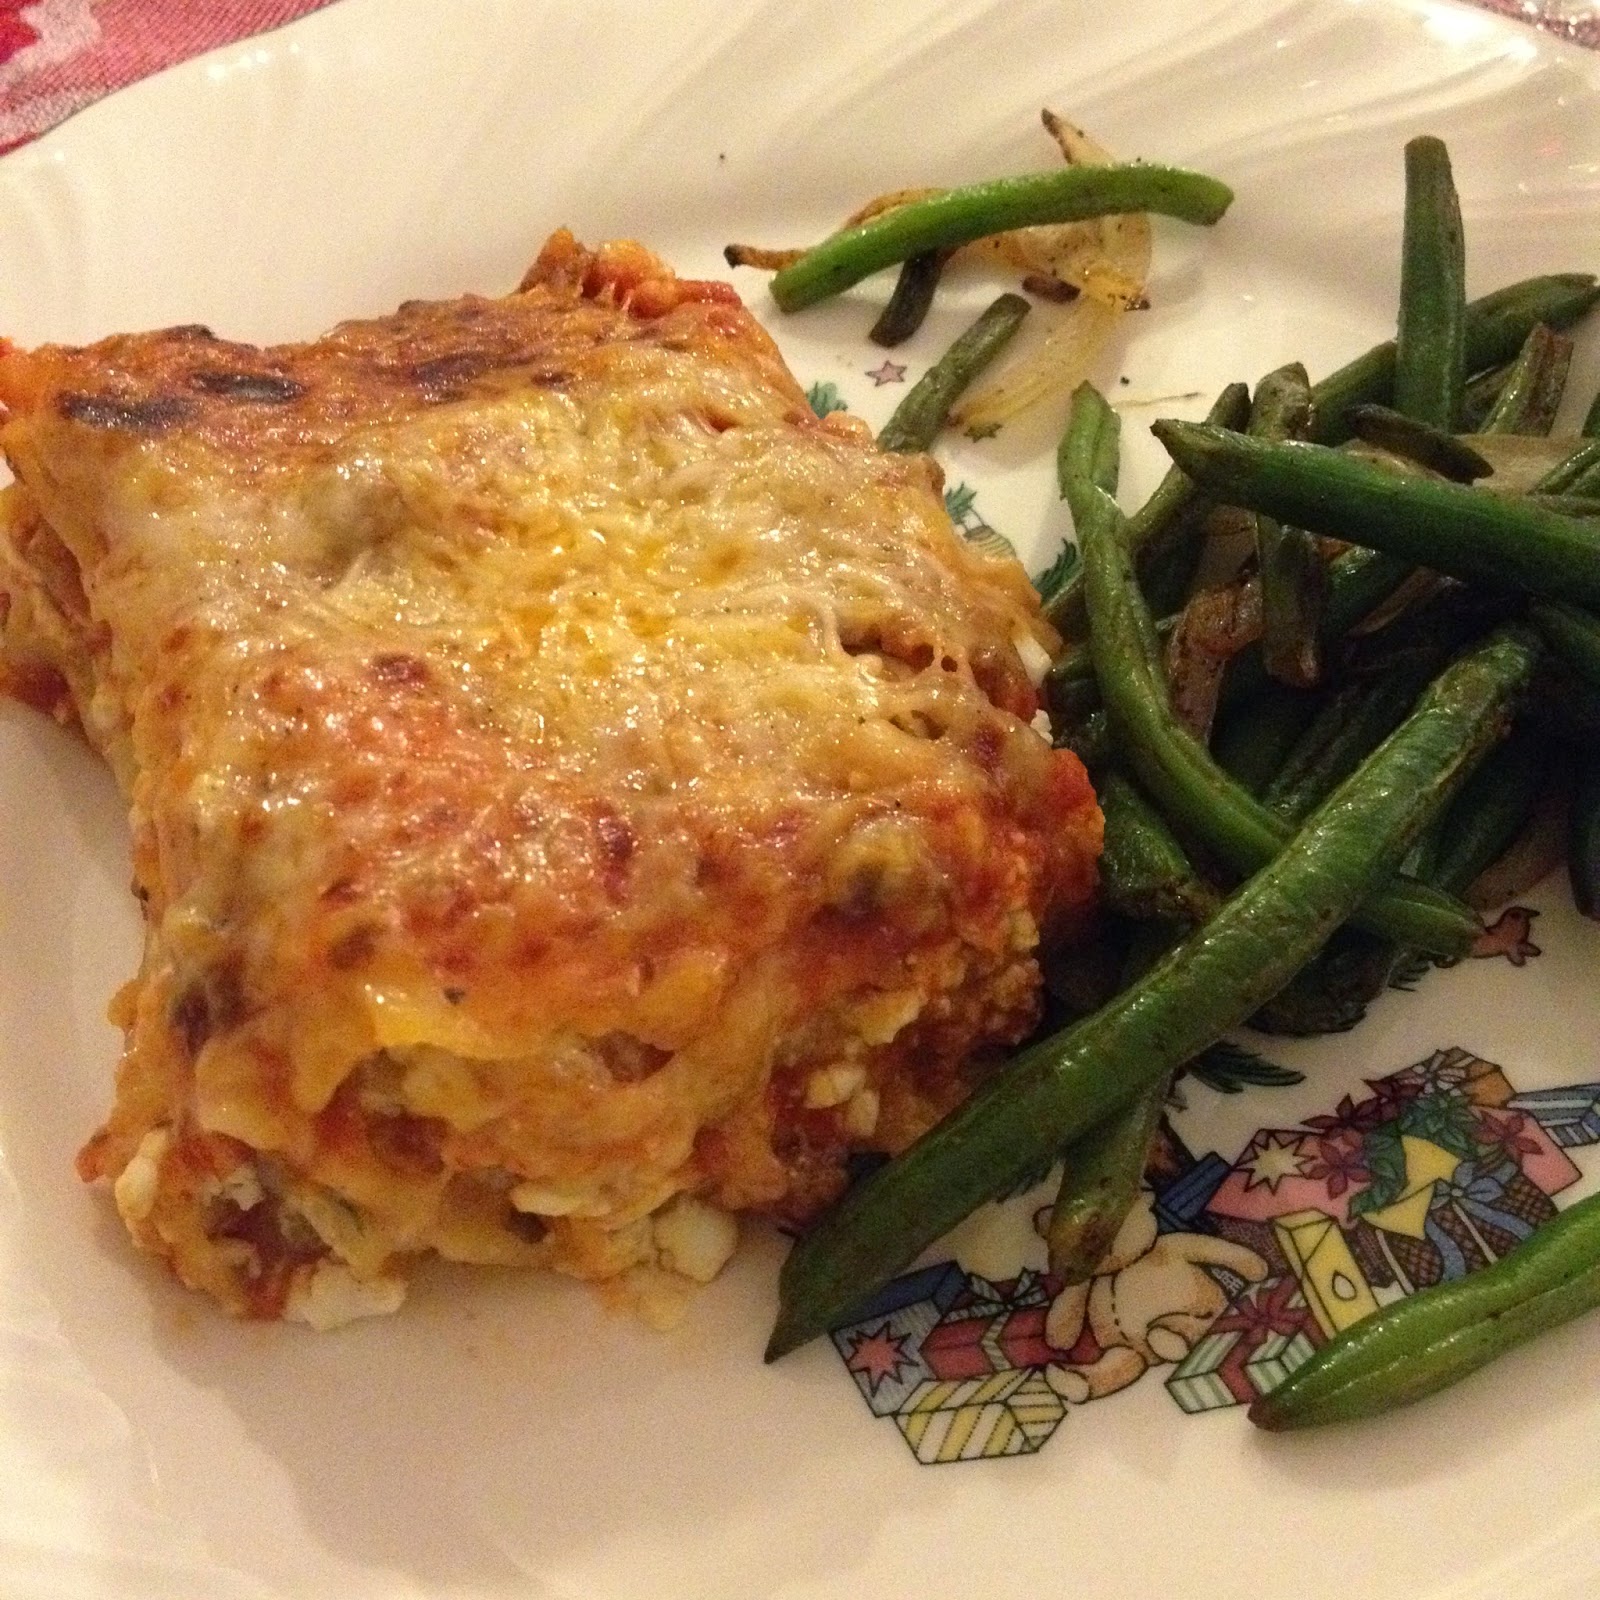 easy lasagna recipe with cottage cheese and uncooked noodles